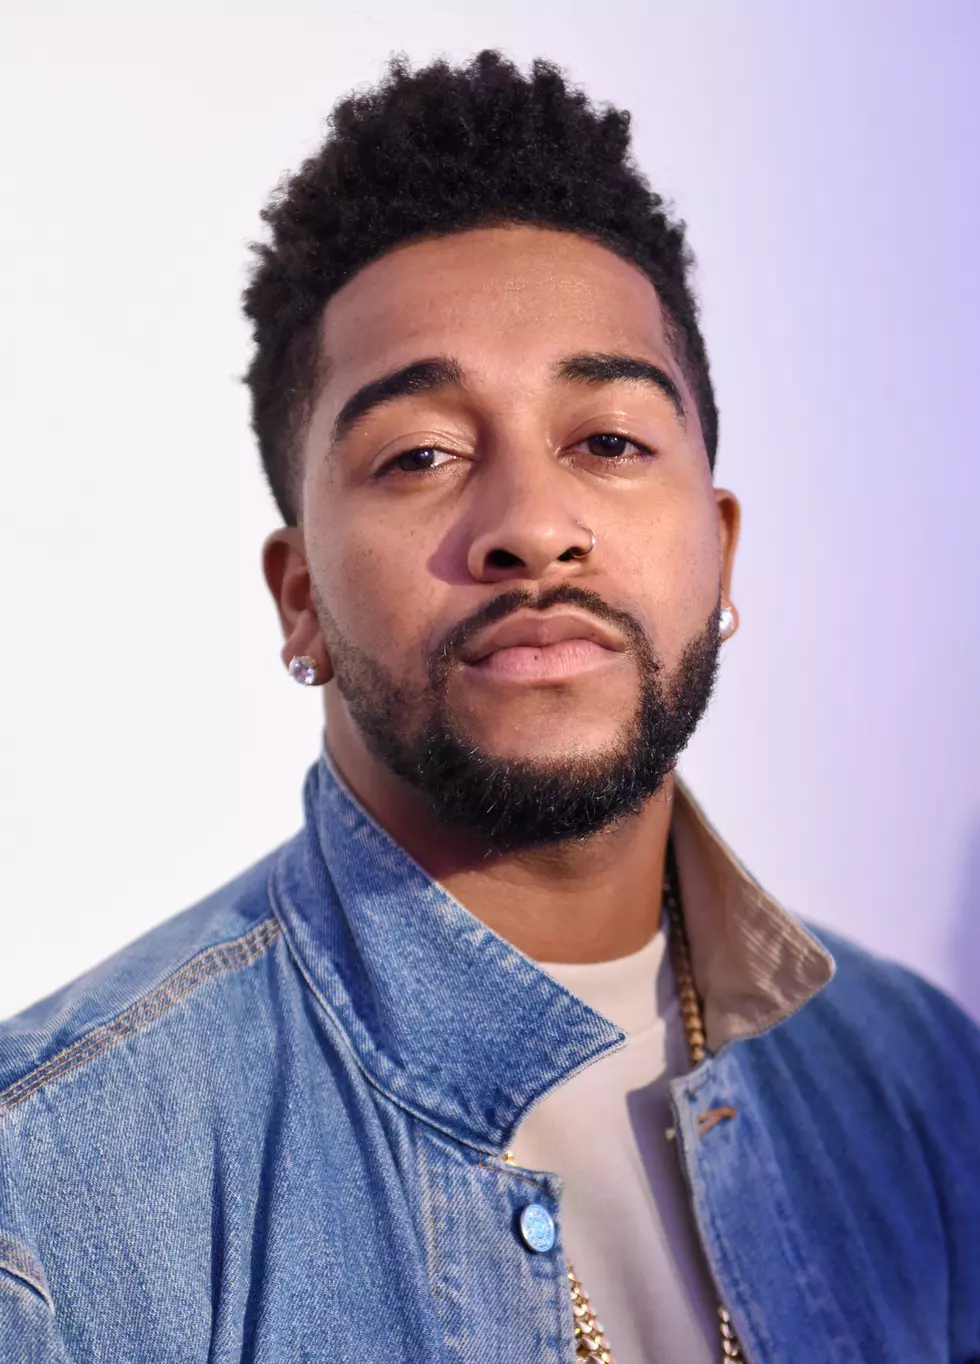 Omarion Drops By The Breakfast Club To Talk New New Music And Love And Hip Hop LA [NSFW, VIDEO]